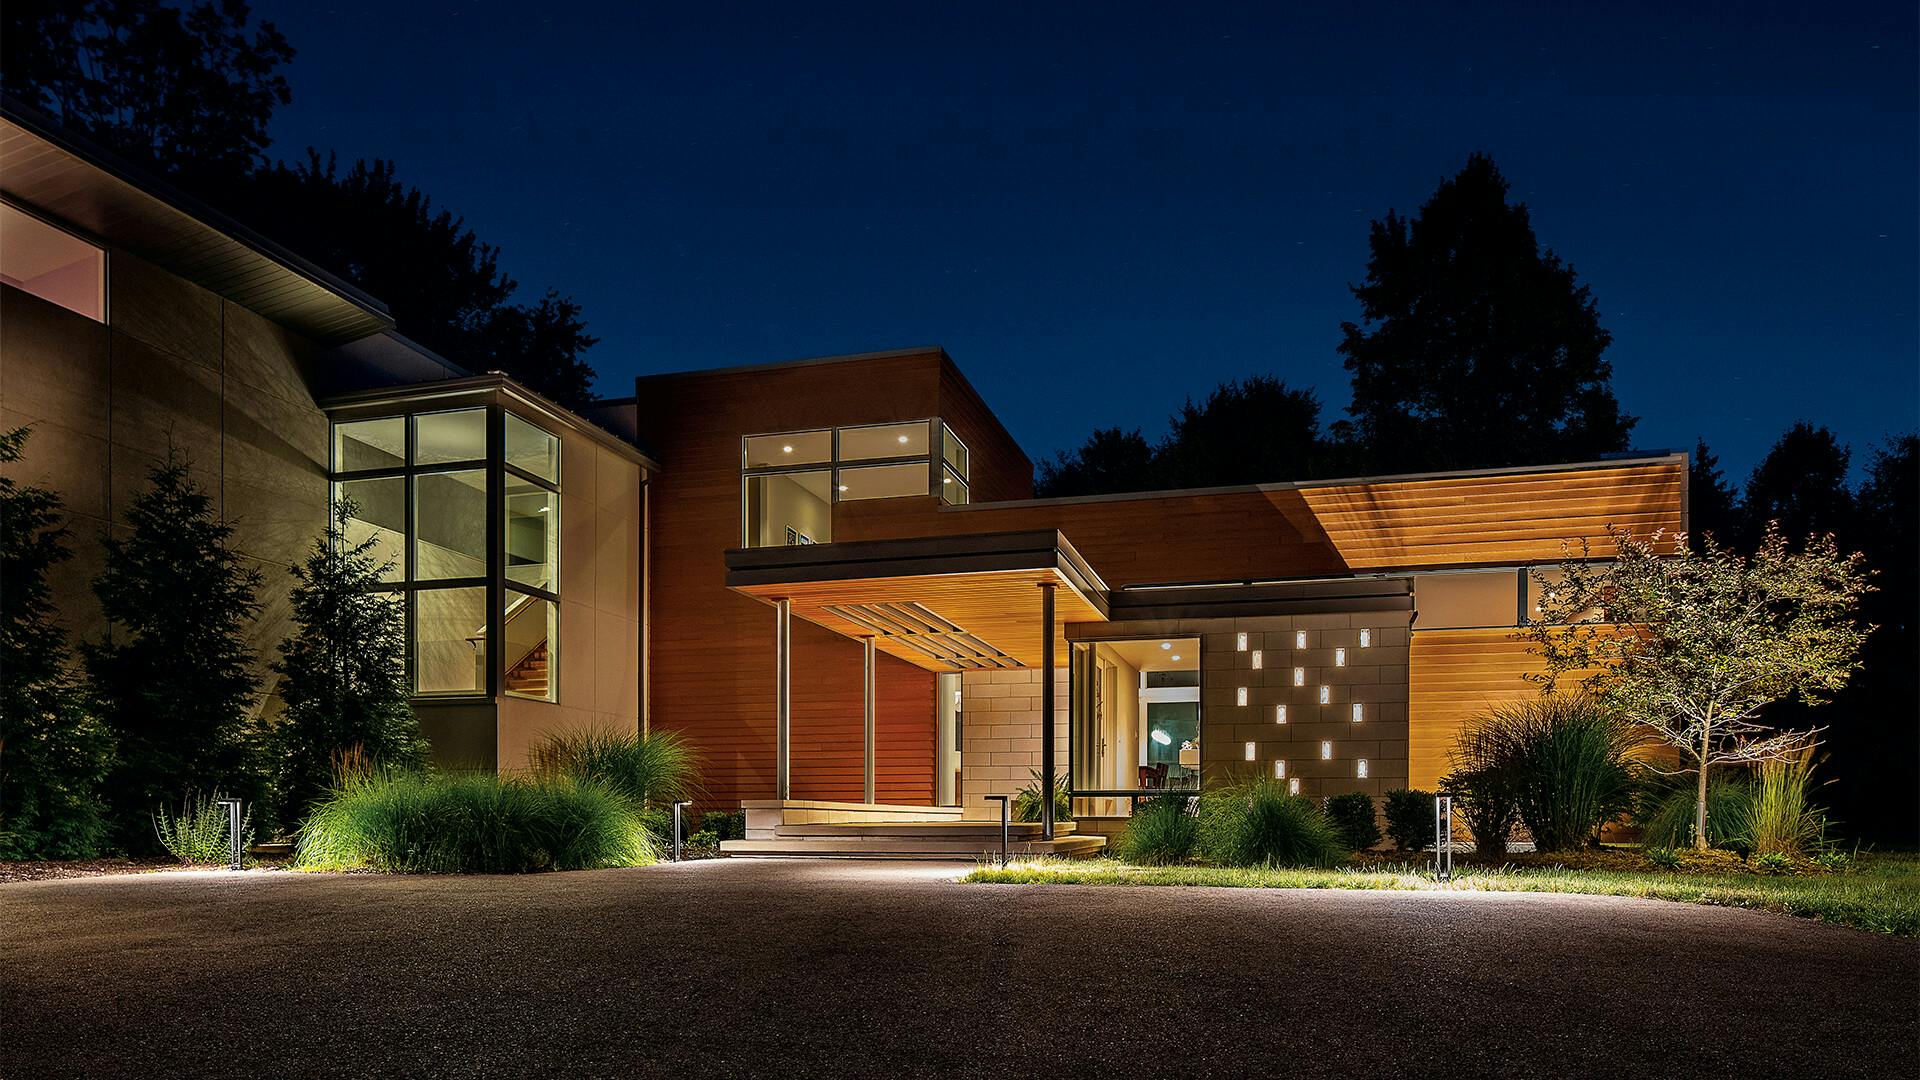 Contemporary residential home at night with variety of landscape lighting